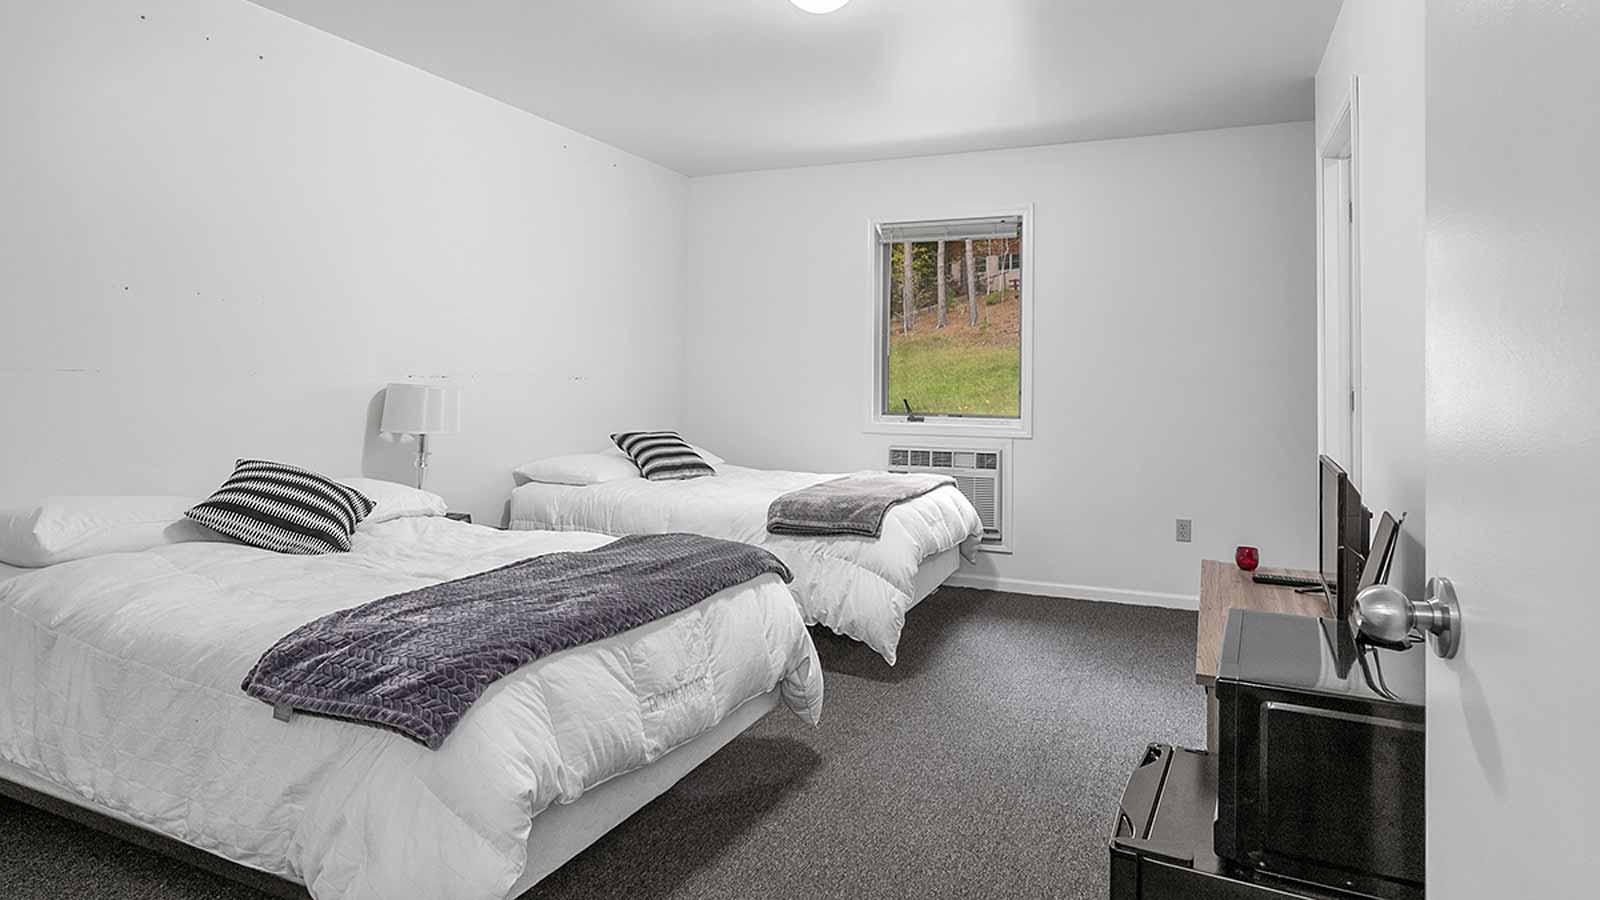 Manton Trails Hotel Rooms are Also Available